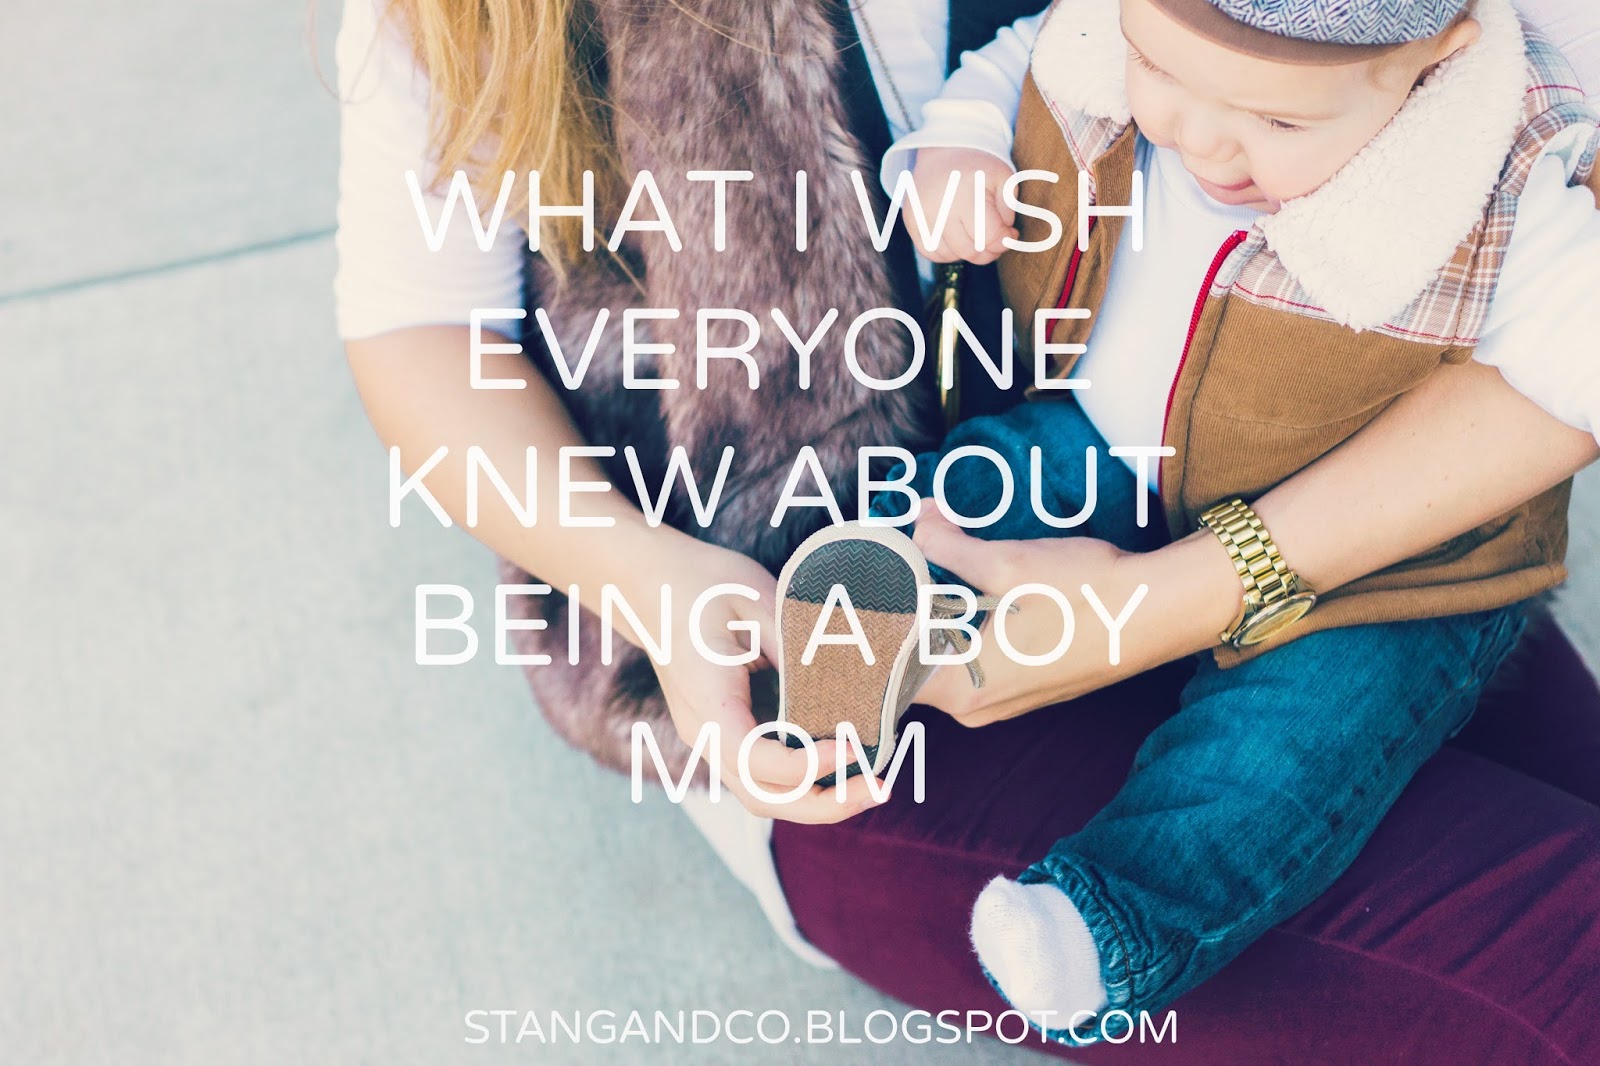 What I Wish Everyone Knew About Being A Boy Mom Stang Co